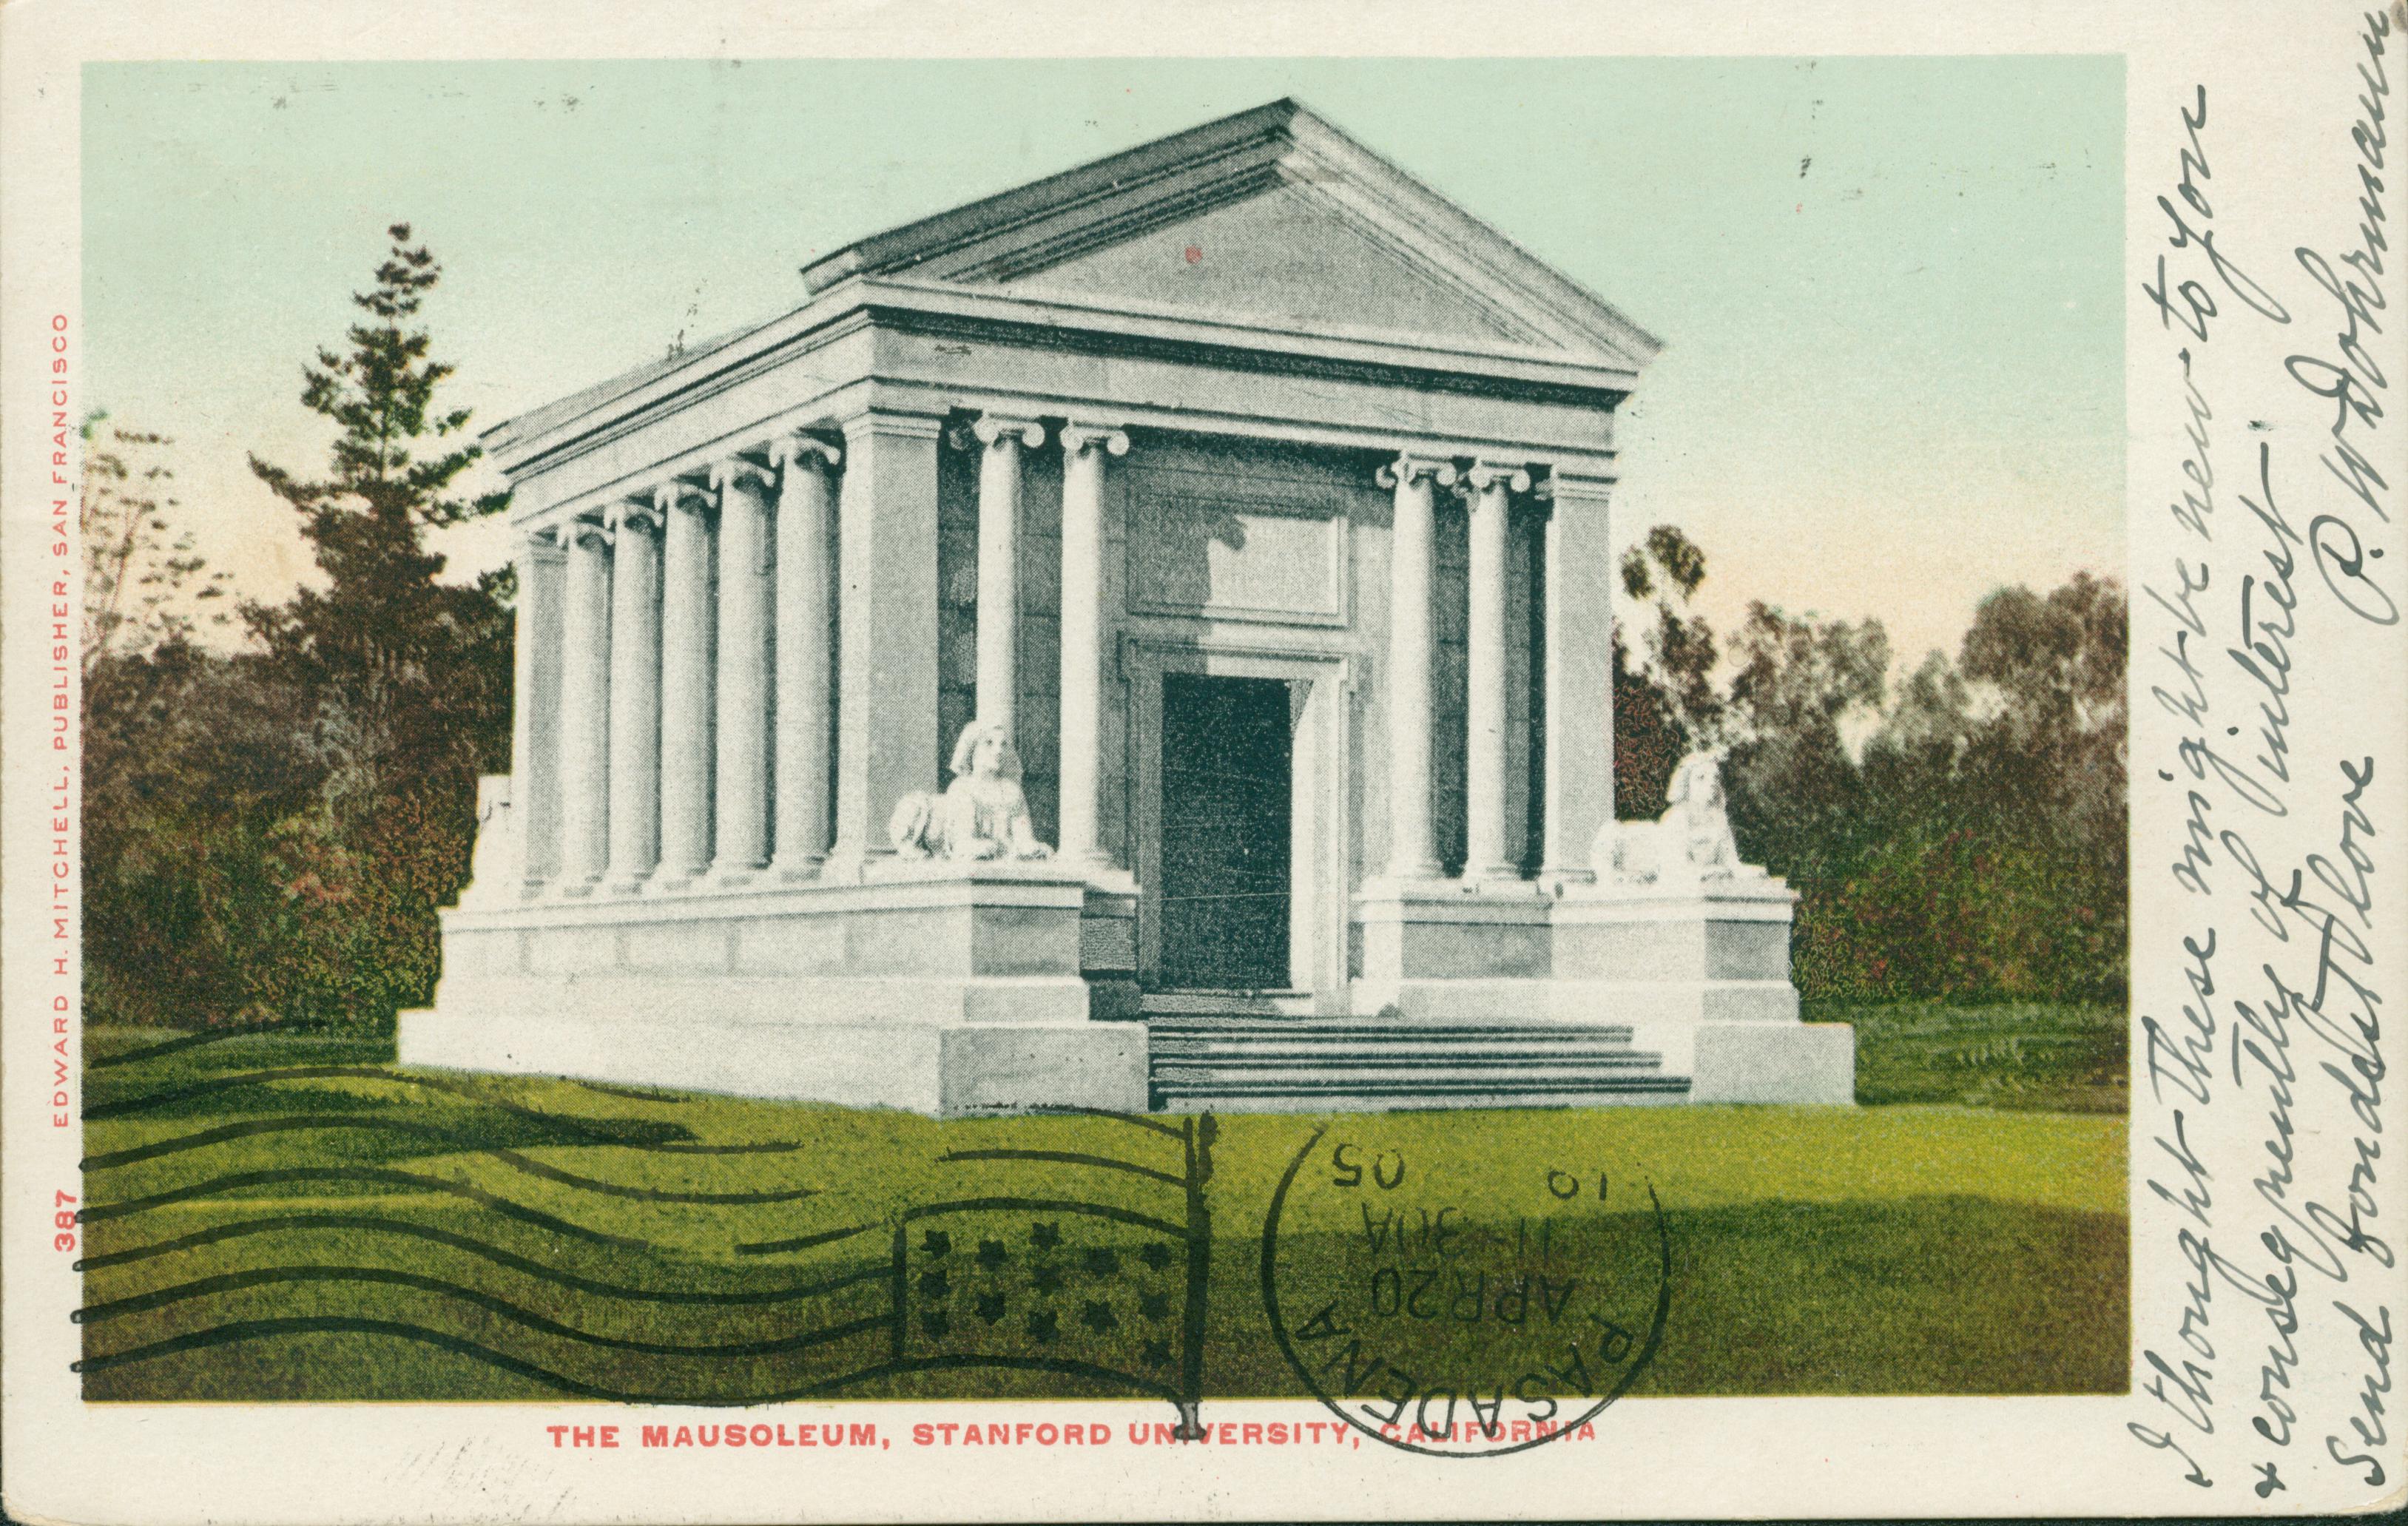 View of the large, white Mausoleum at Stanford University, surrounded by  lawn and trees